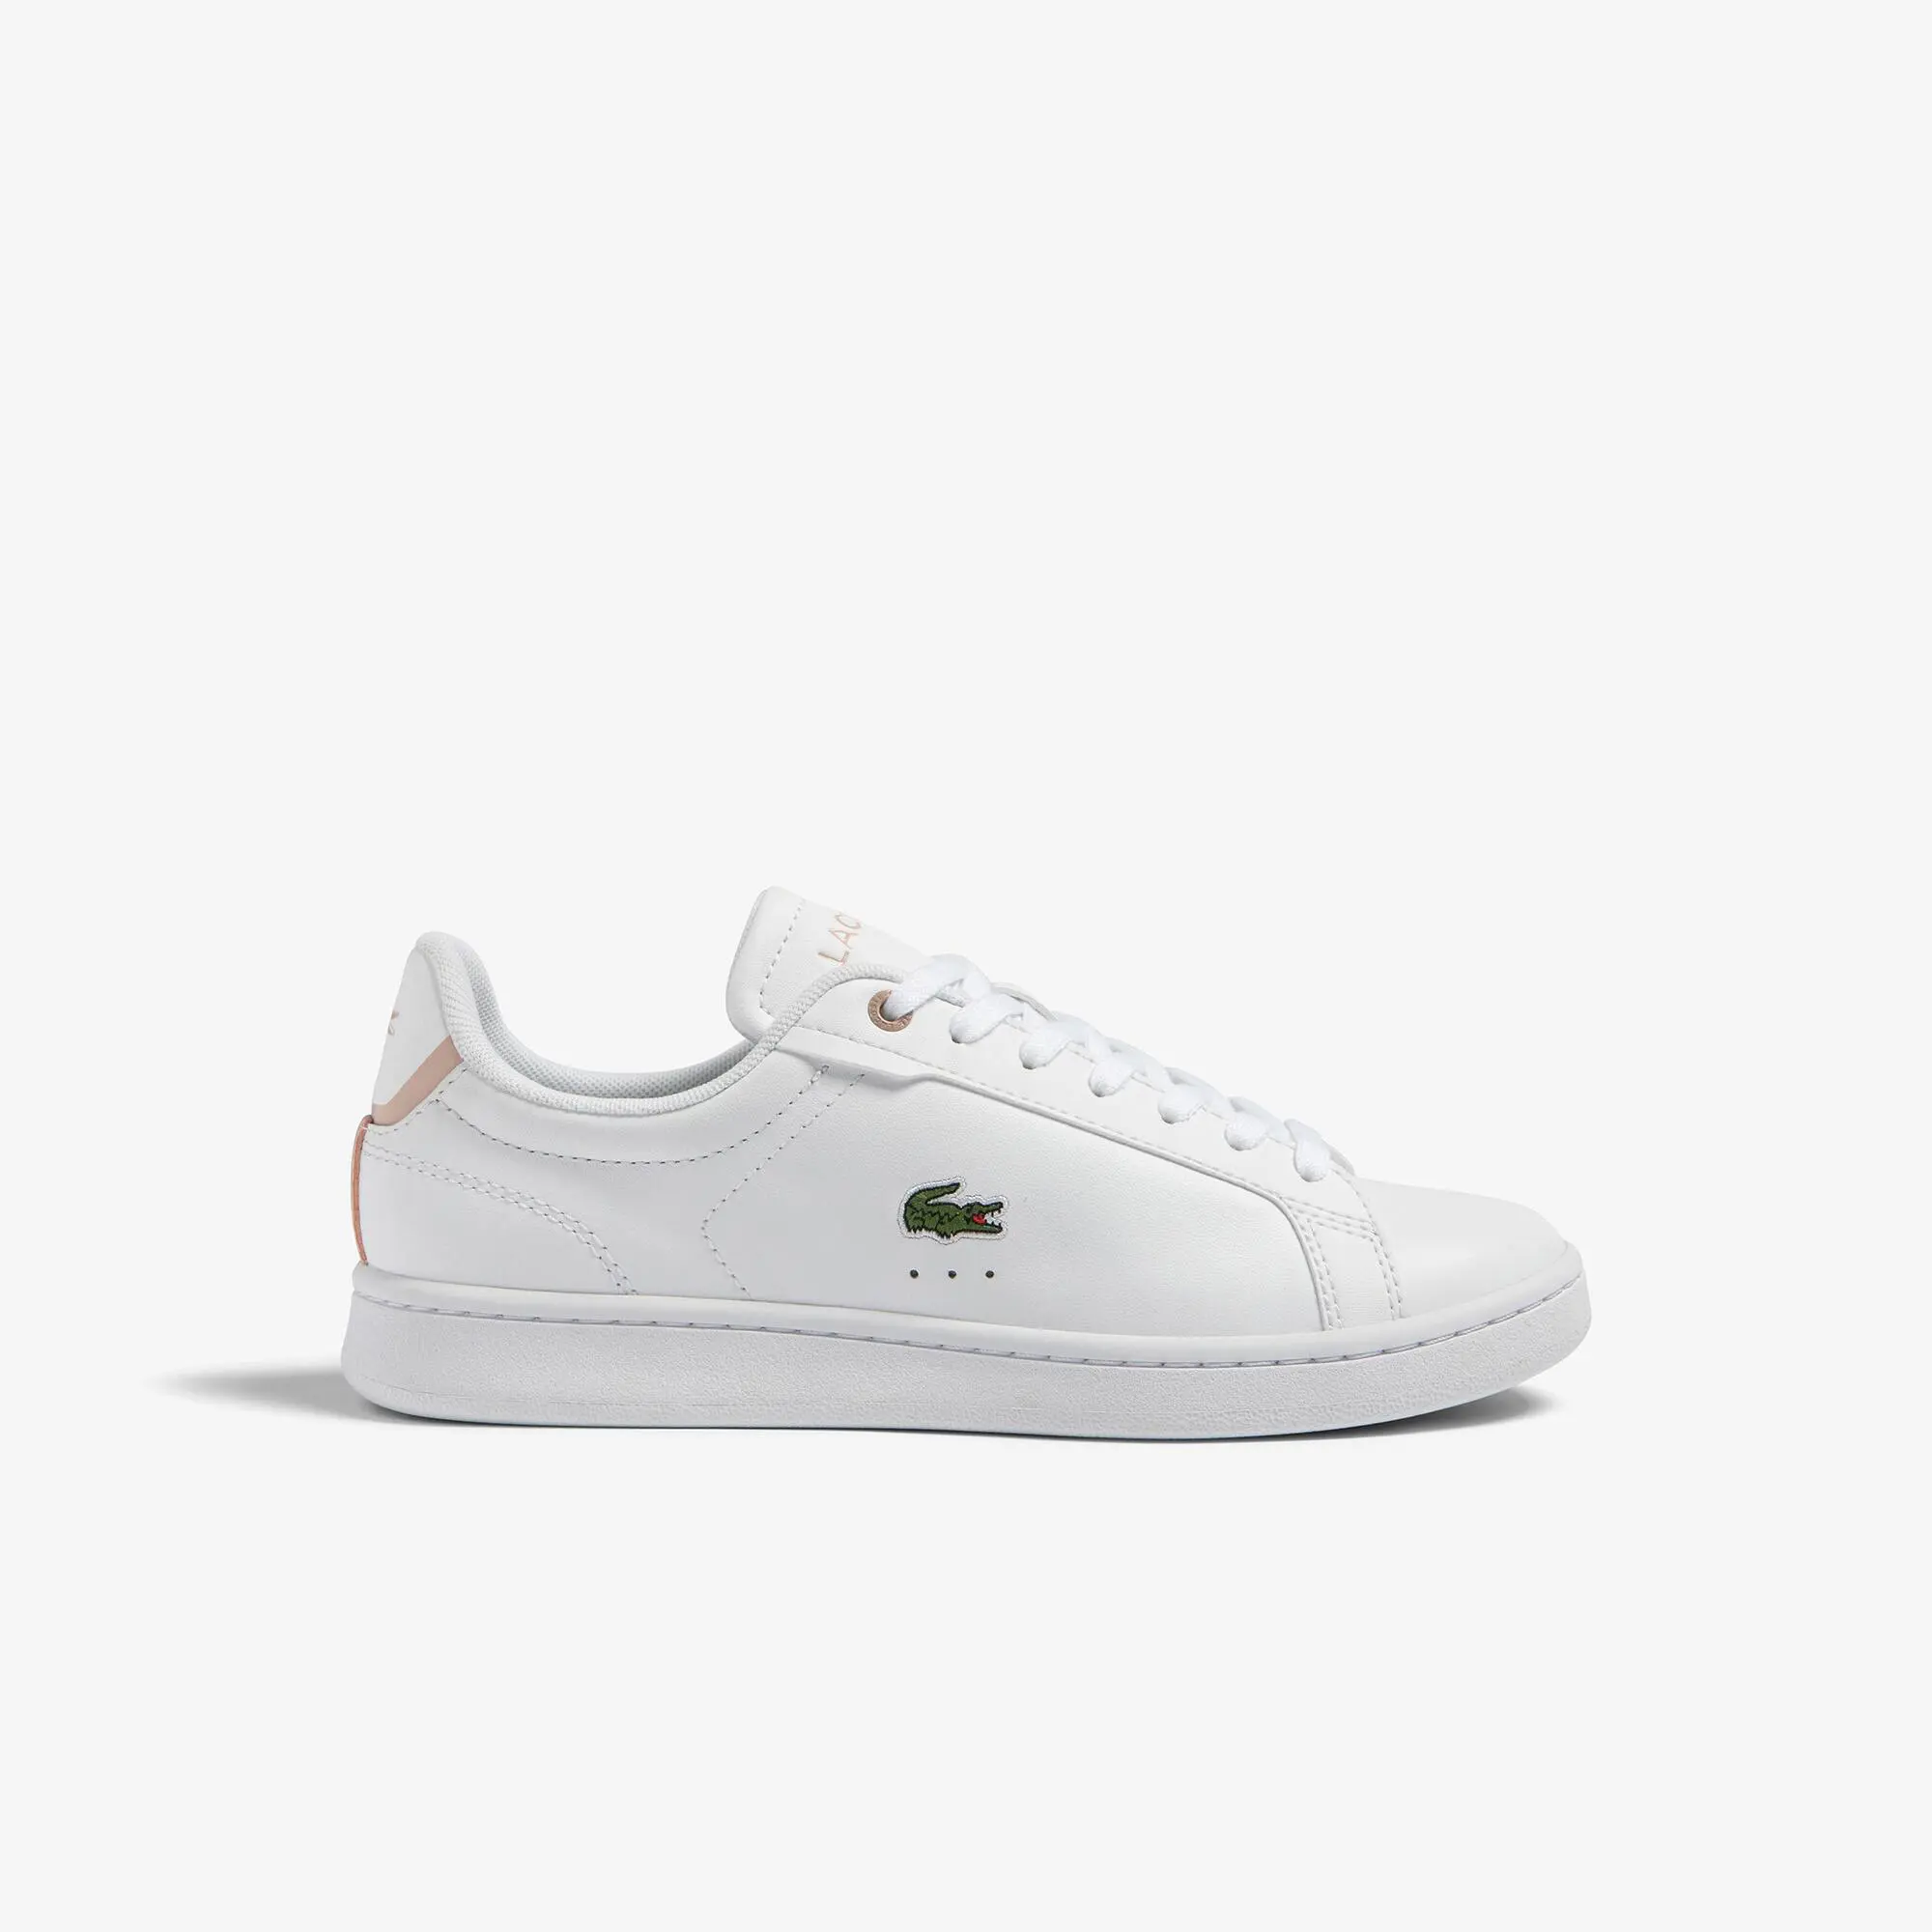 Lacoste Women's Lacoste Carnaby Pro BL Tonal Leather Trainers. 1